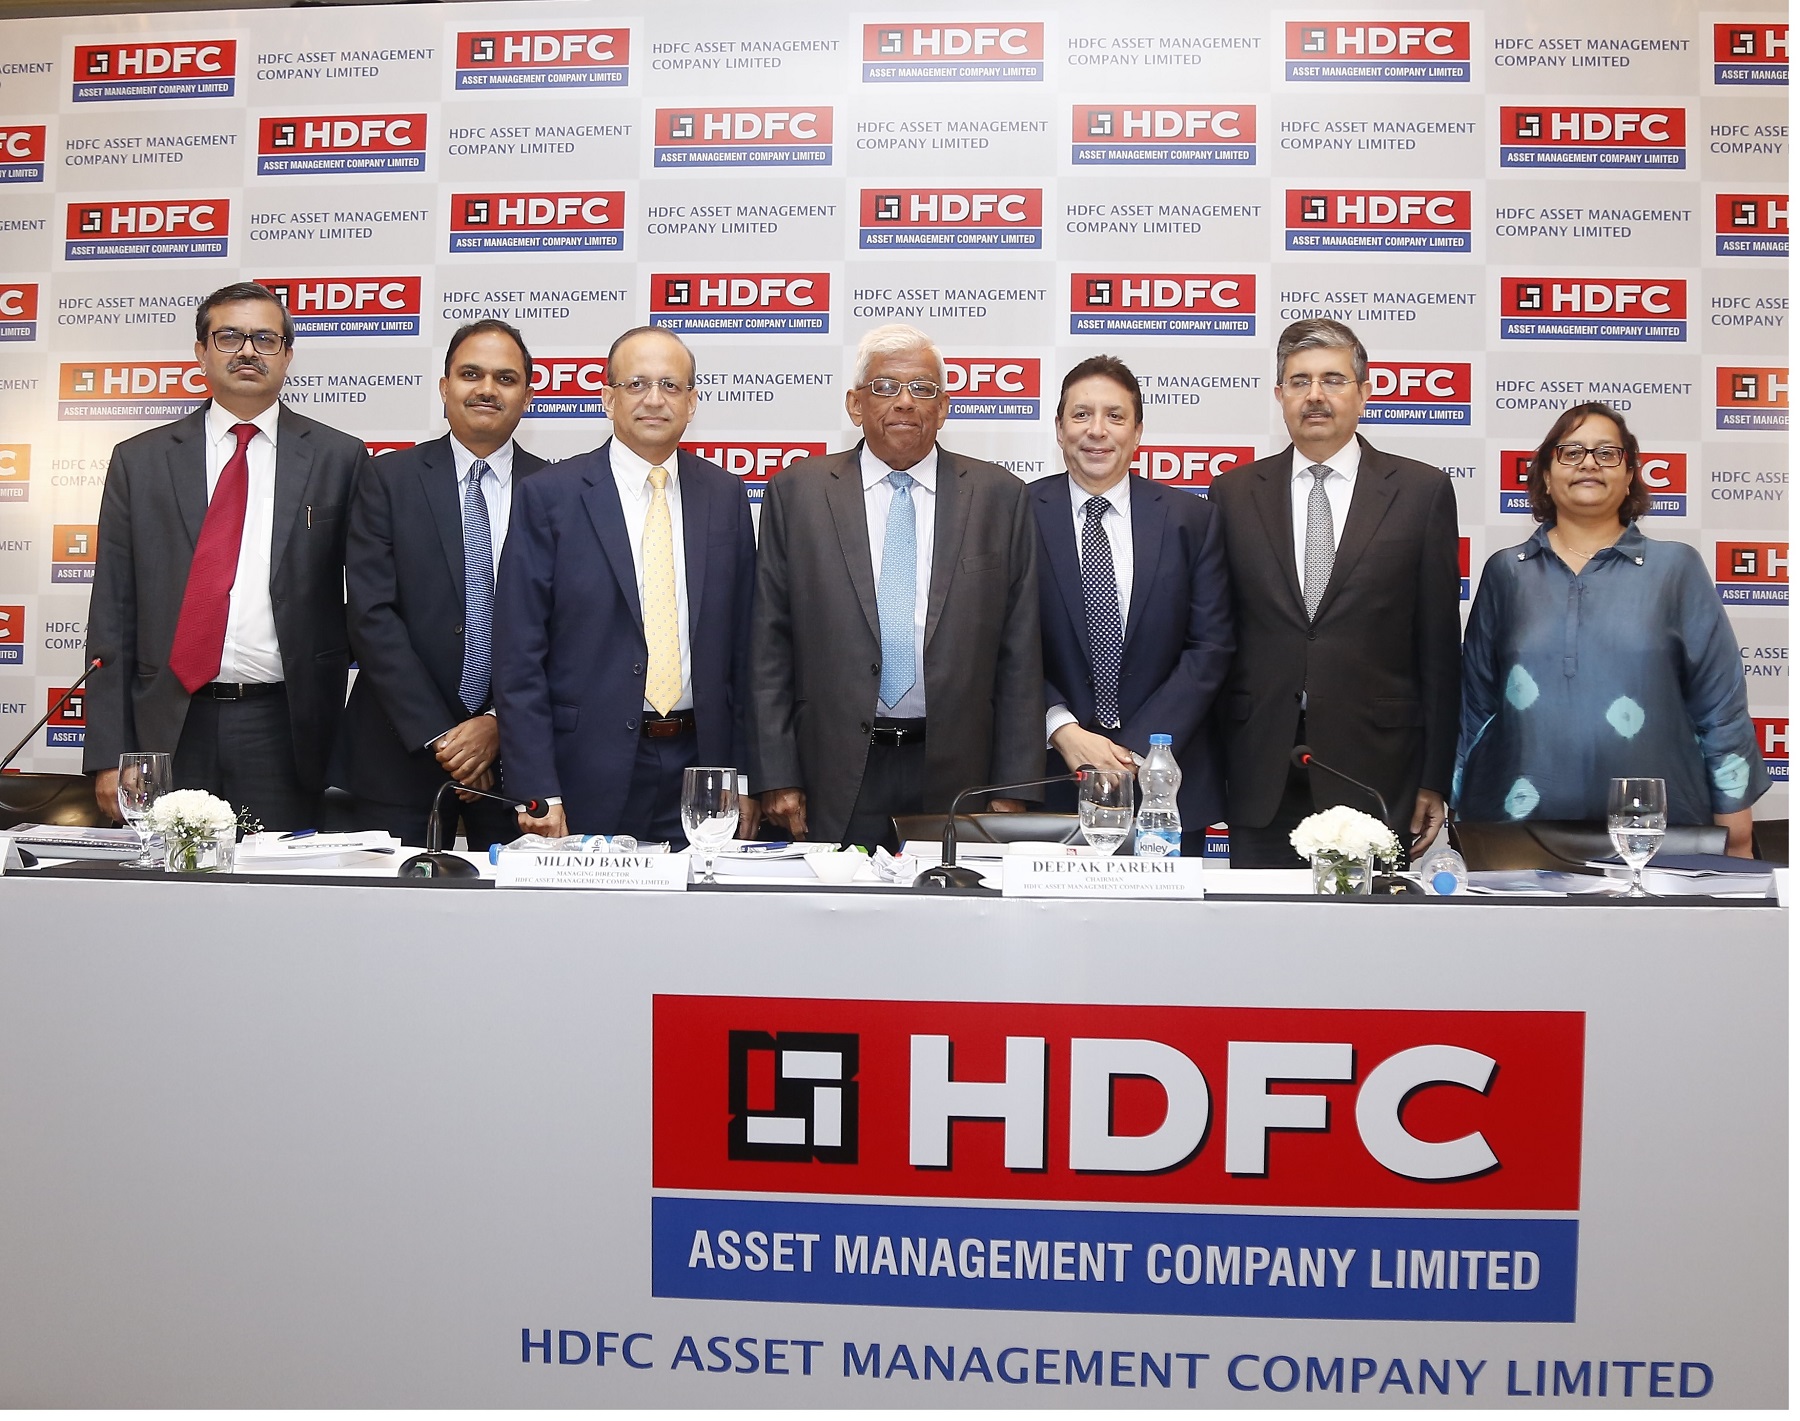 hdfc-asset-management-company-limited-announces-initial-public-offer-ipo-to-open-on-july-25